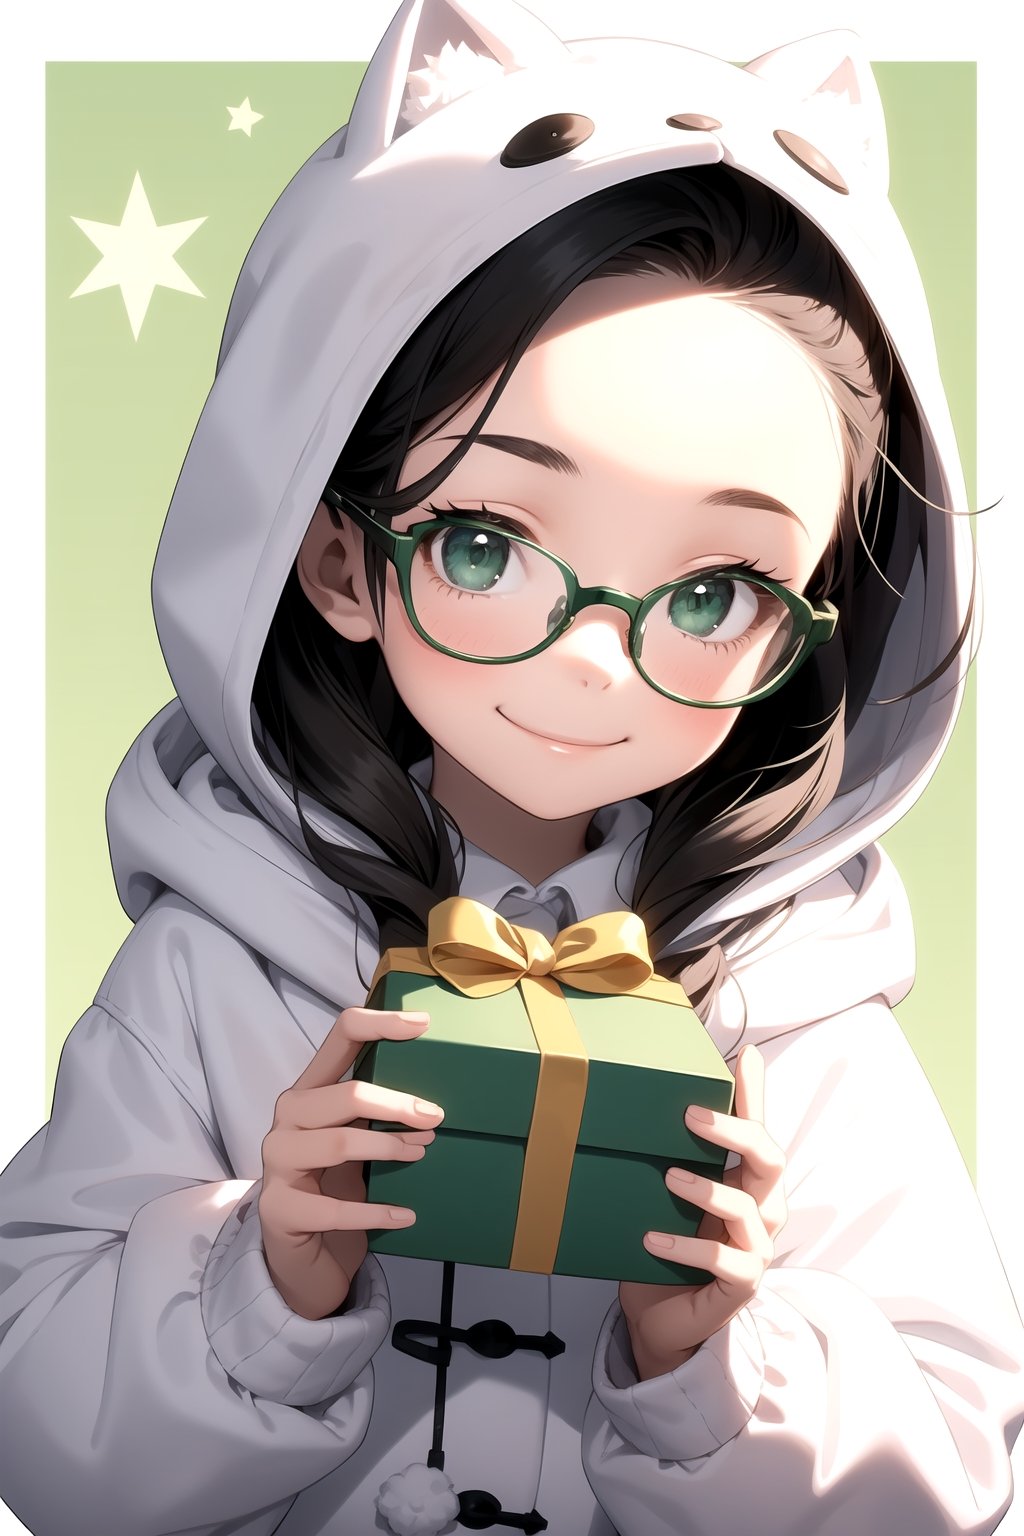 1 little girl wearing a white fluffy hooded coat smiles with a green gift box, twinkle star background, eyewear, forehead